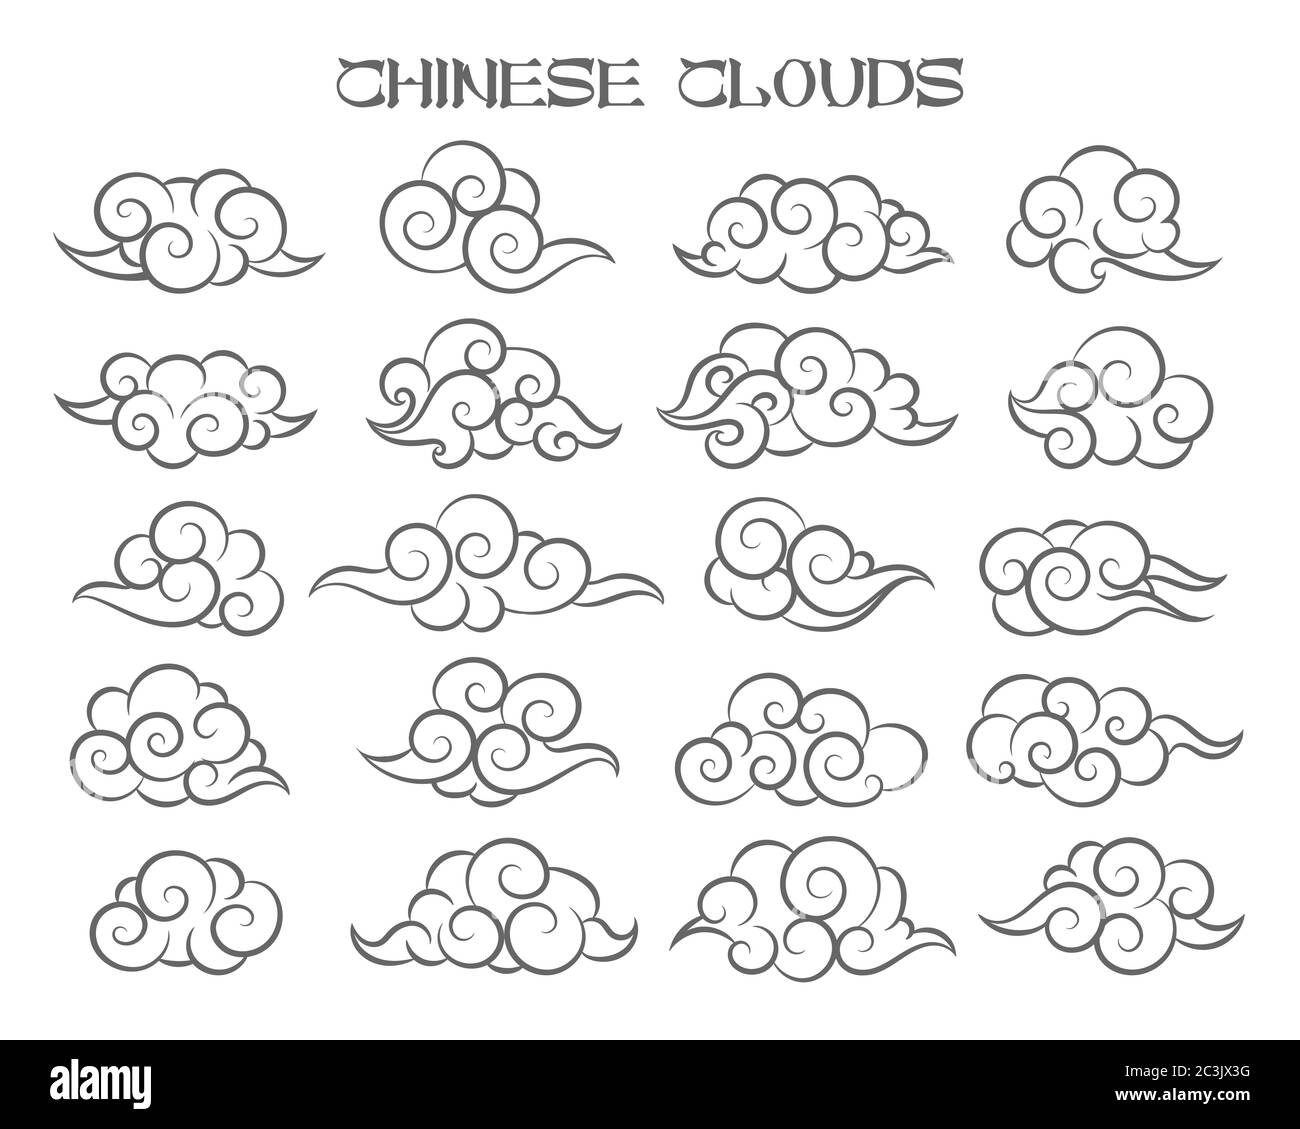 Collection of Hand Drawn Asian Clouds. Vector illustration. Stock Vector